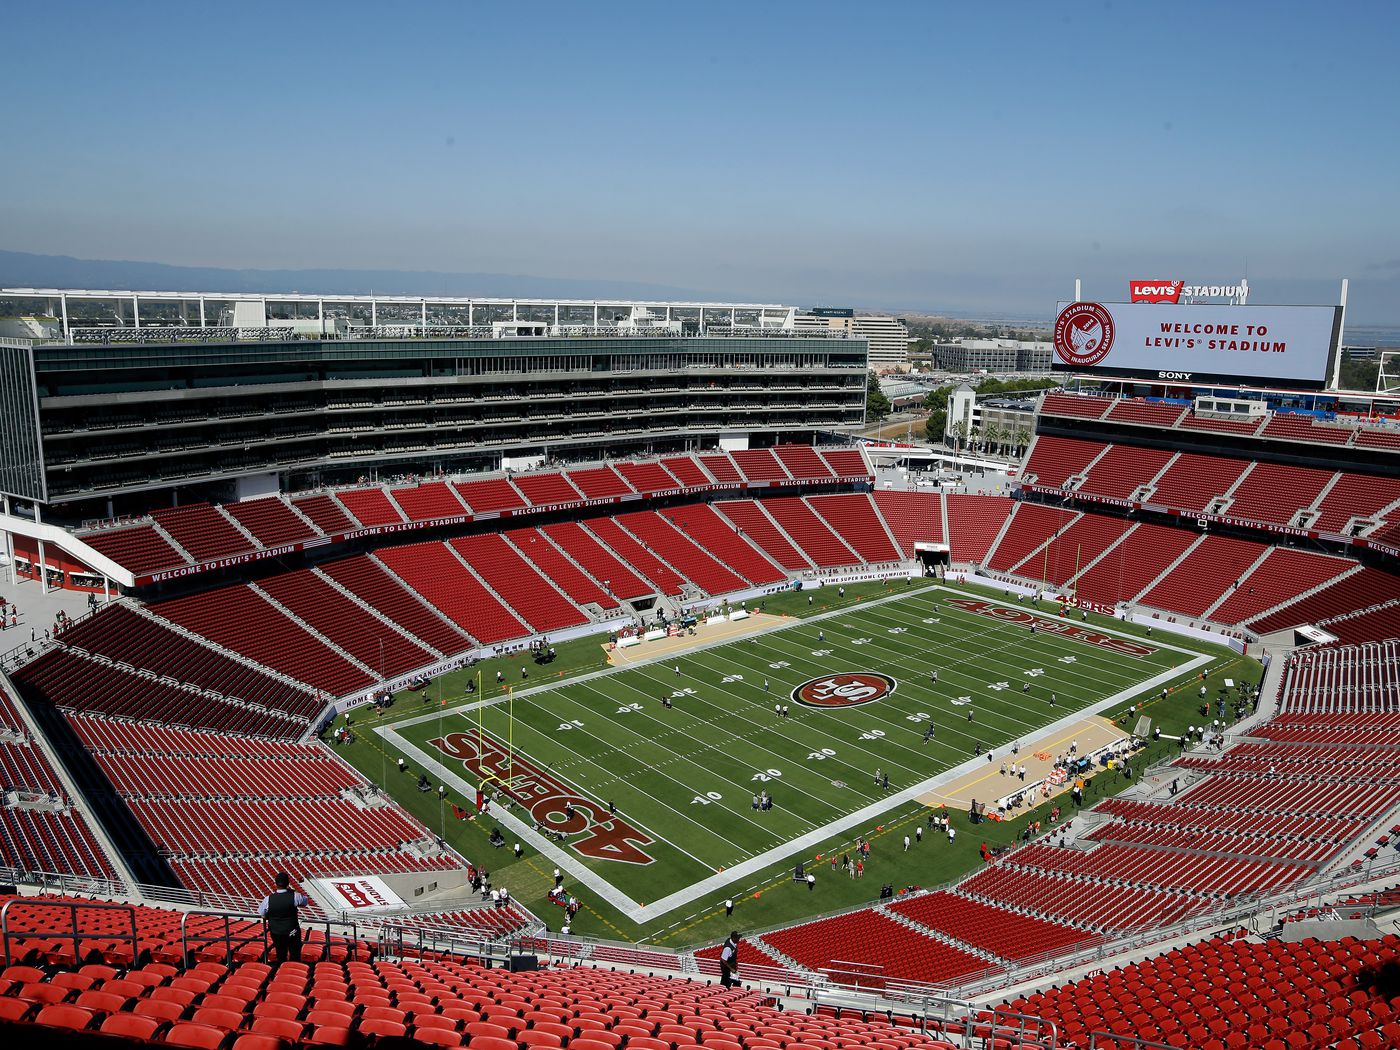 levi's stadium was not built on an american indian burial ground